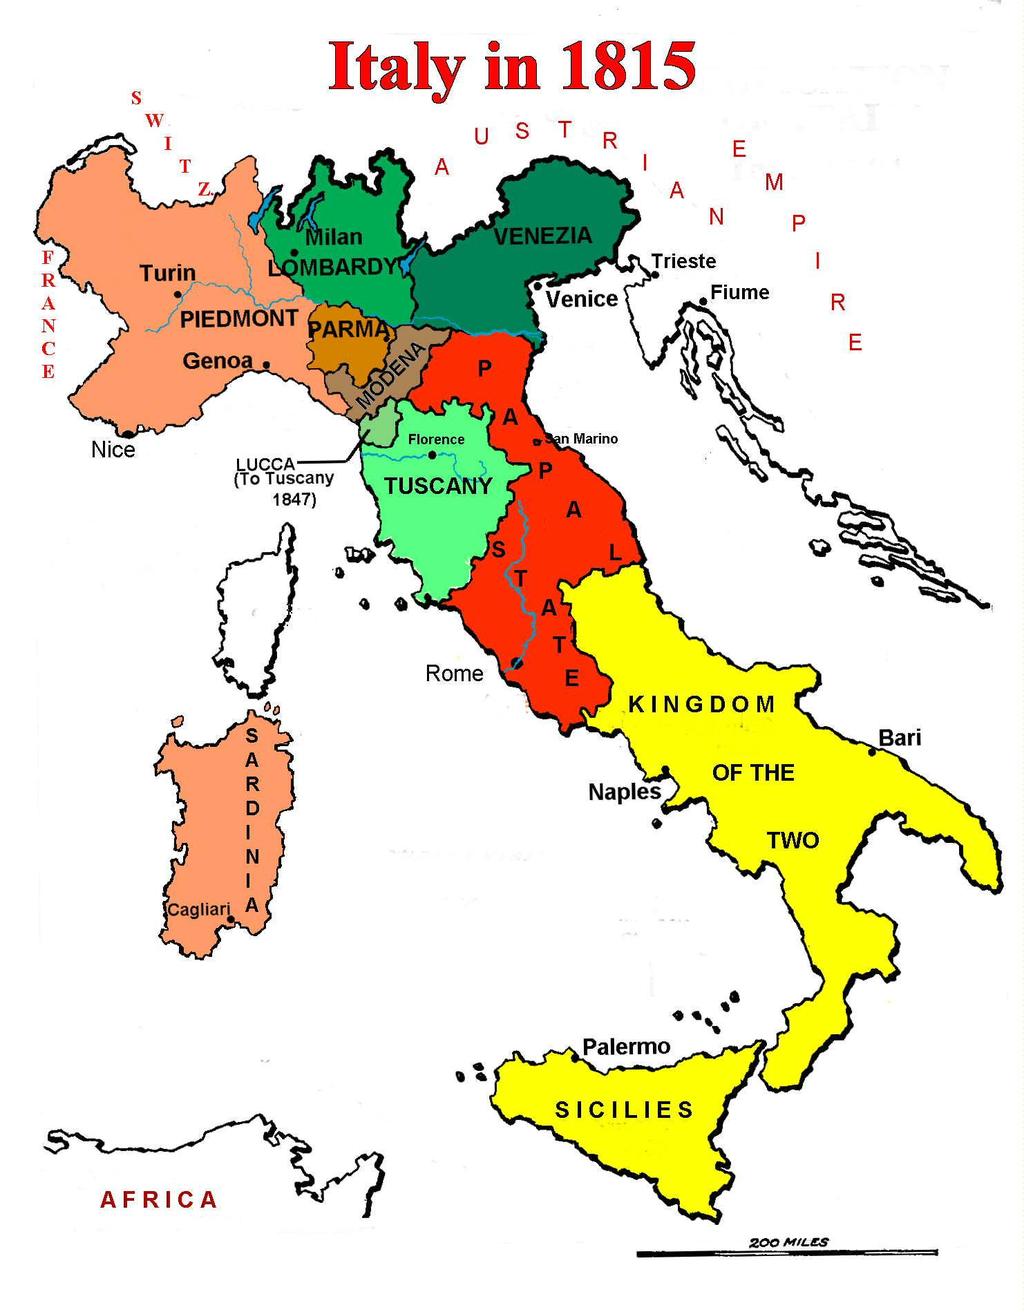 Since the time of the middle ages, Italy has been a collection of provinces, early to mid 1800s Italy was ruled by Austria and the Pope.